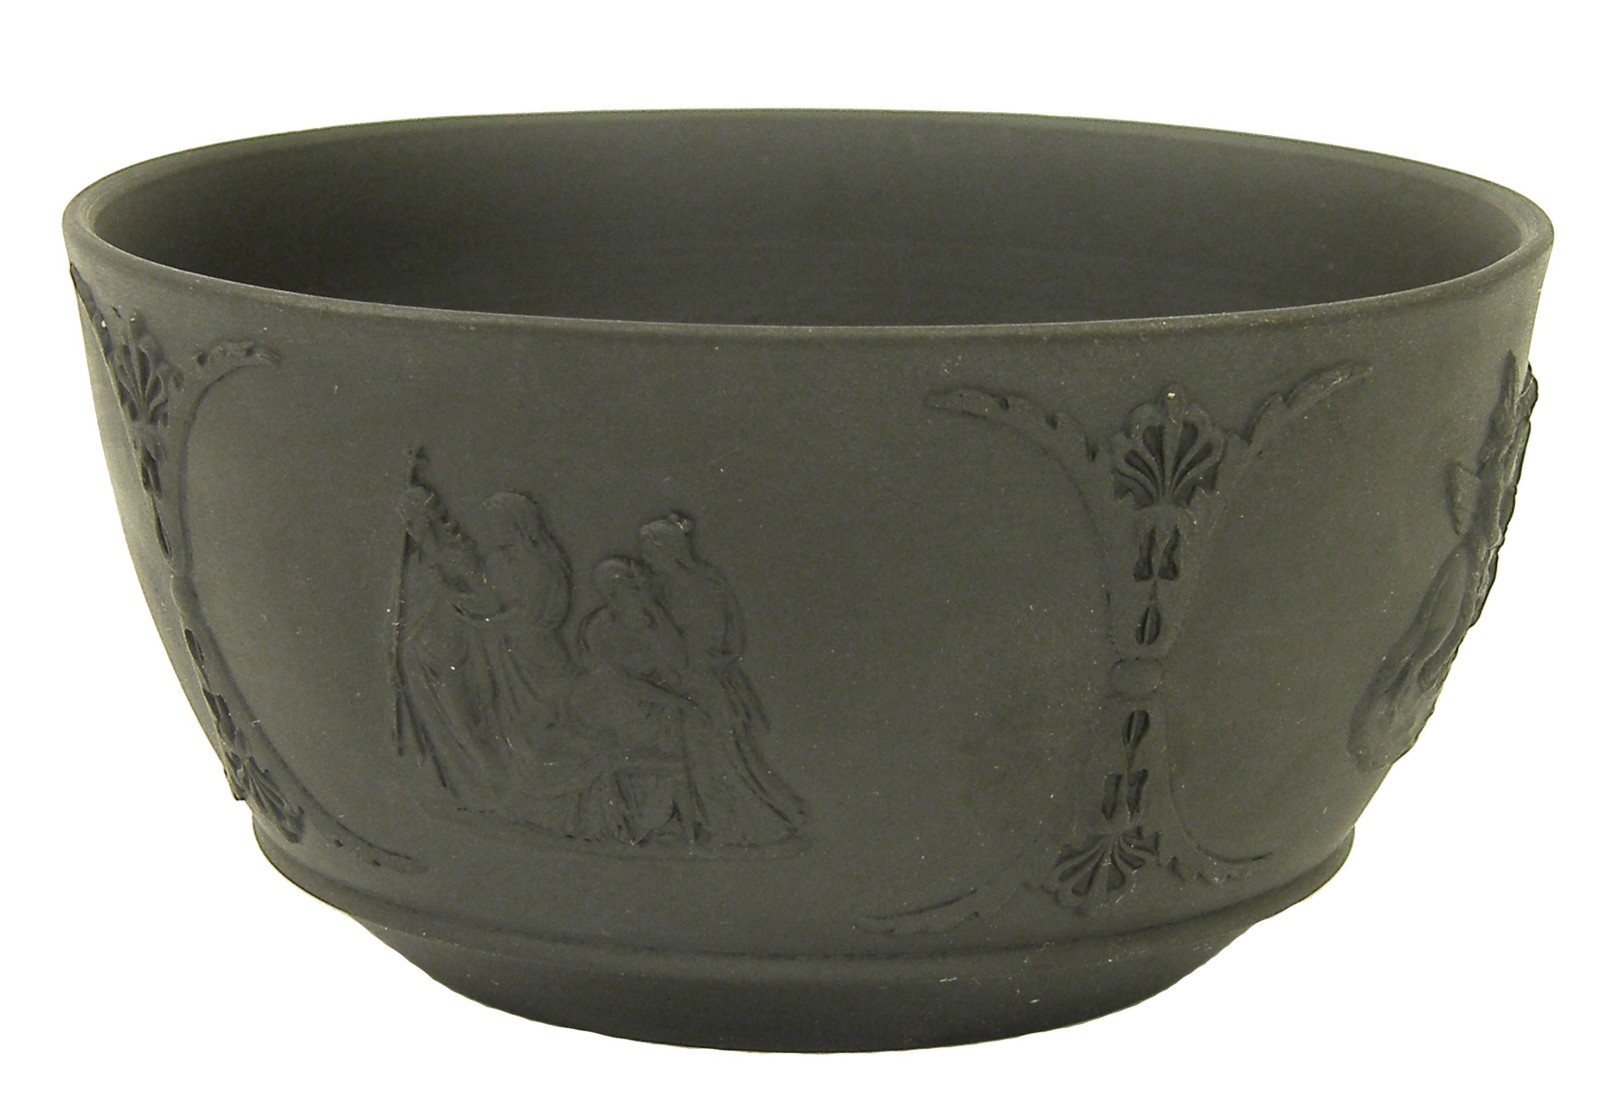 Wedgwood basalt bowl with typical relief decoration, 4" diameter